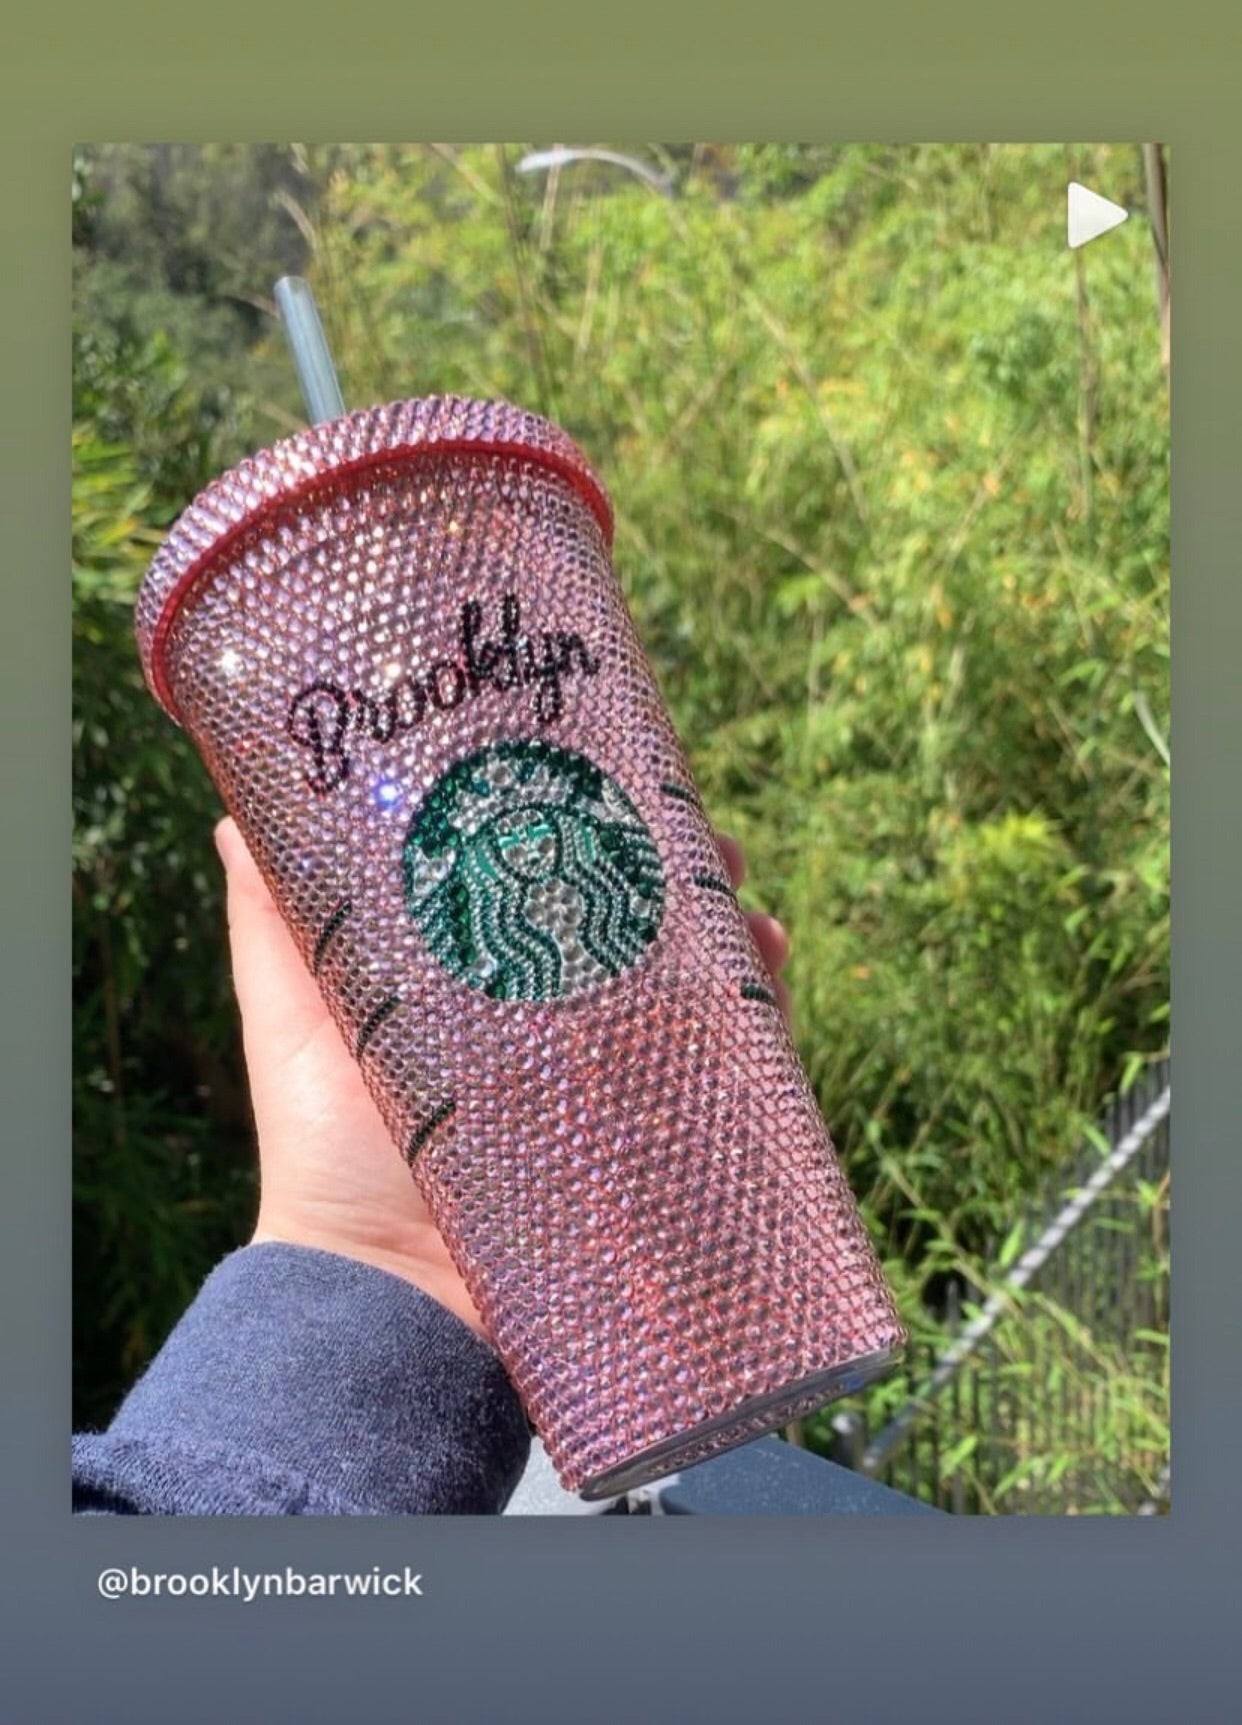 Stylish BLING Crystallized STARBUCKS Cold Cup Light Pink